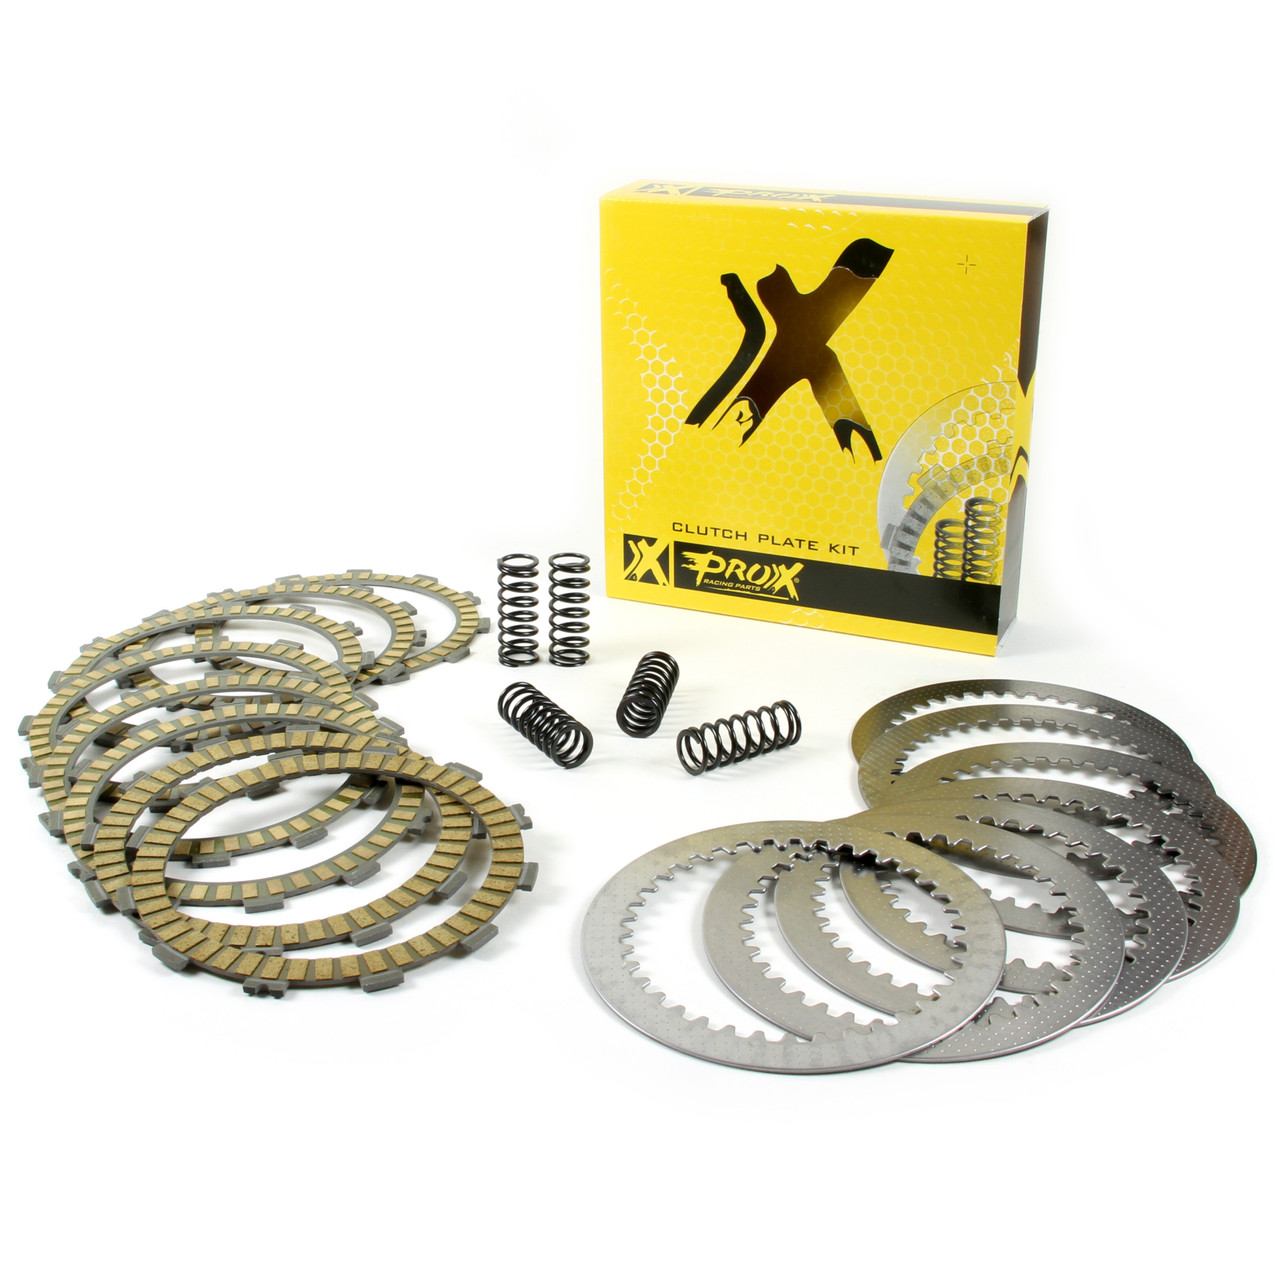 Prox New Complete Clutch Plate Set w/Springs, 19-44006CK